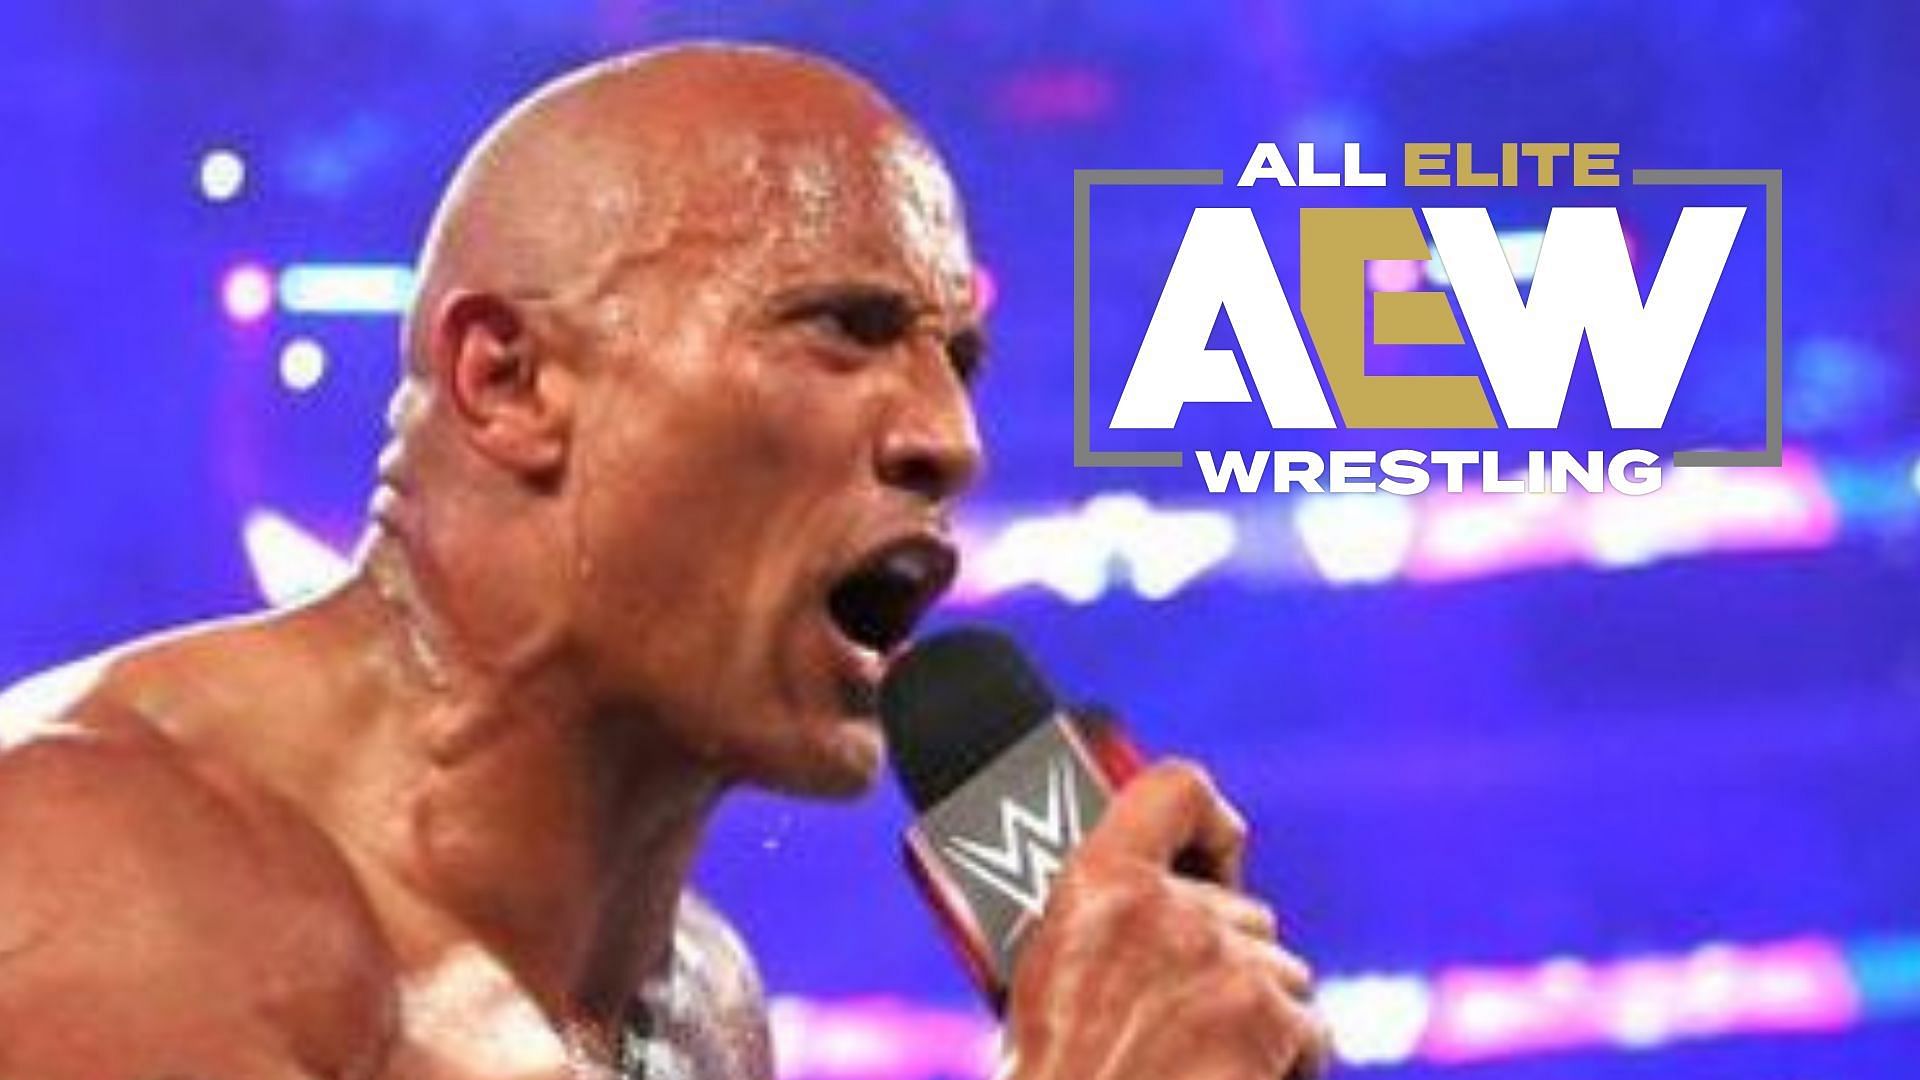 The Rock made an AEW star cry backstage at a WWE event